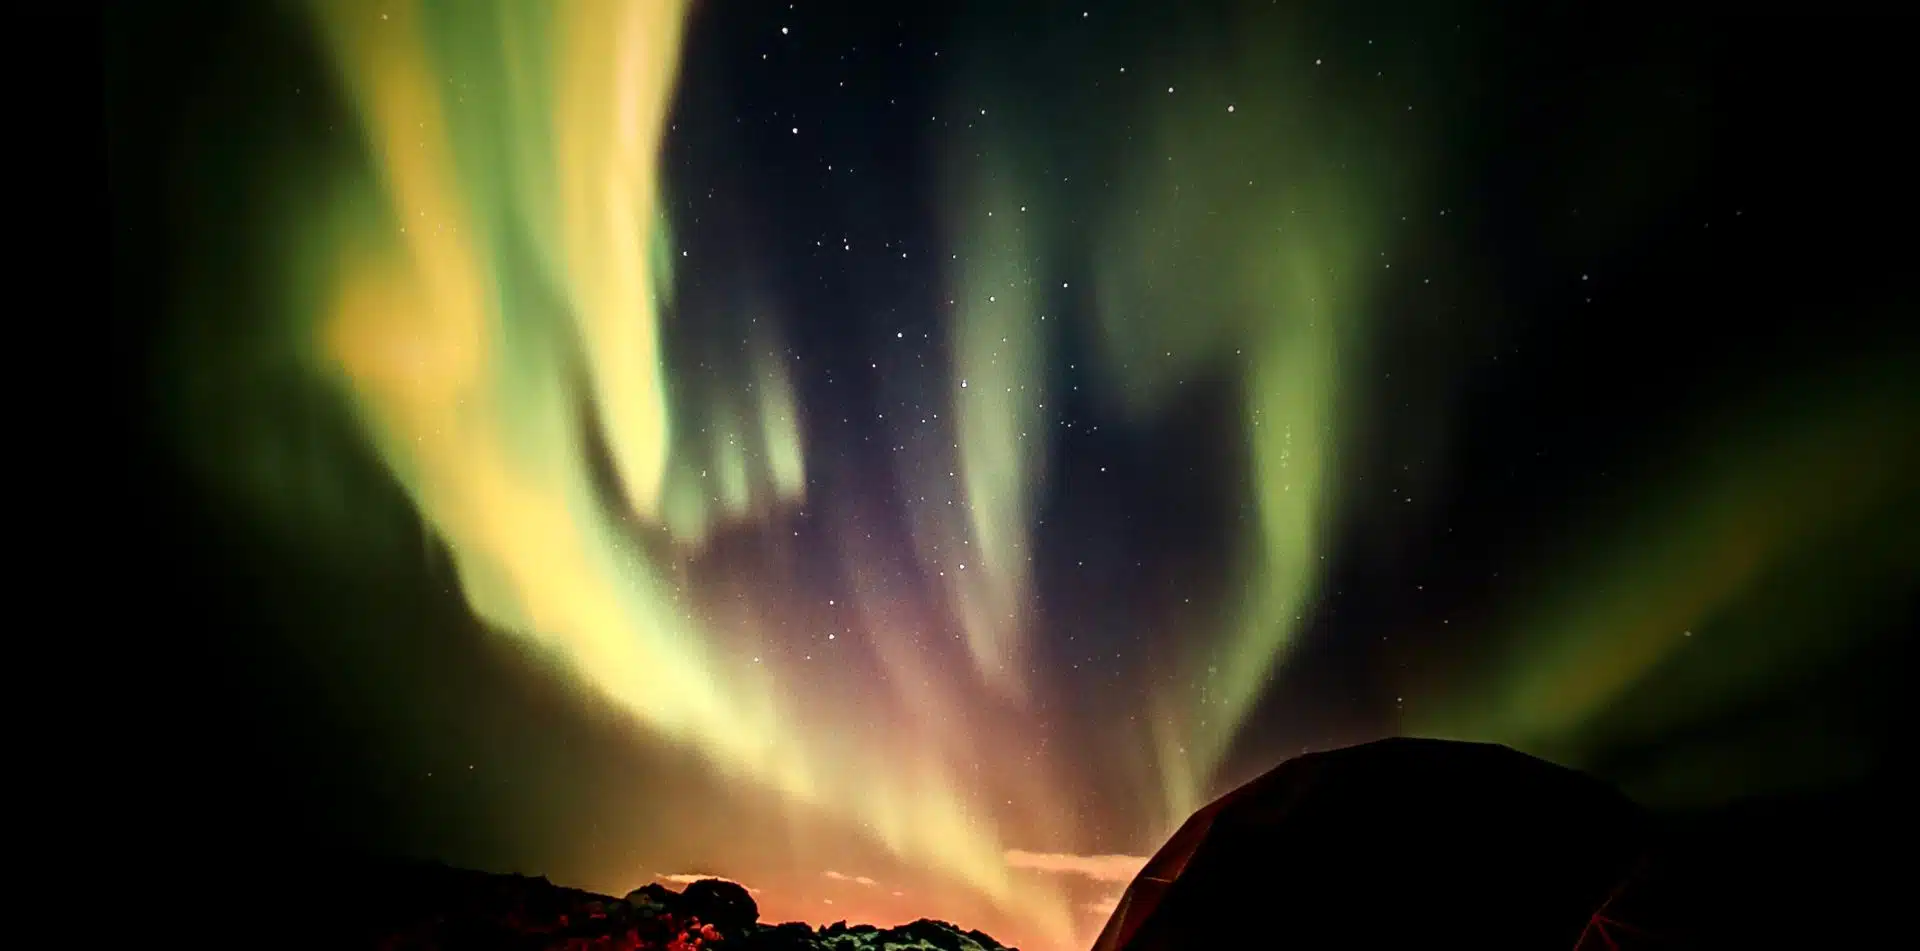 Experience the colorful Northern Lights in Iceland